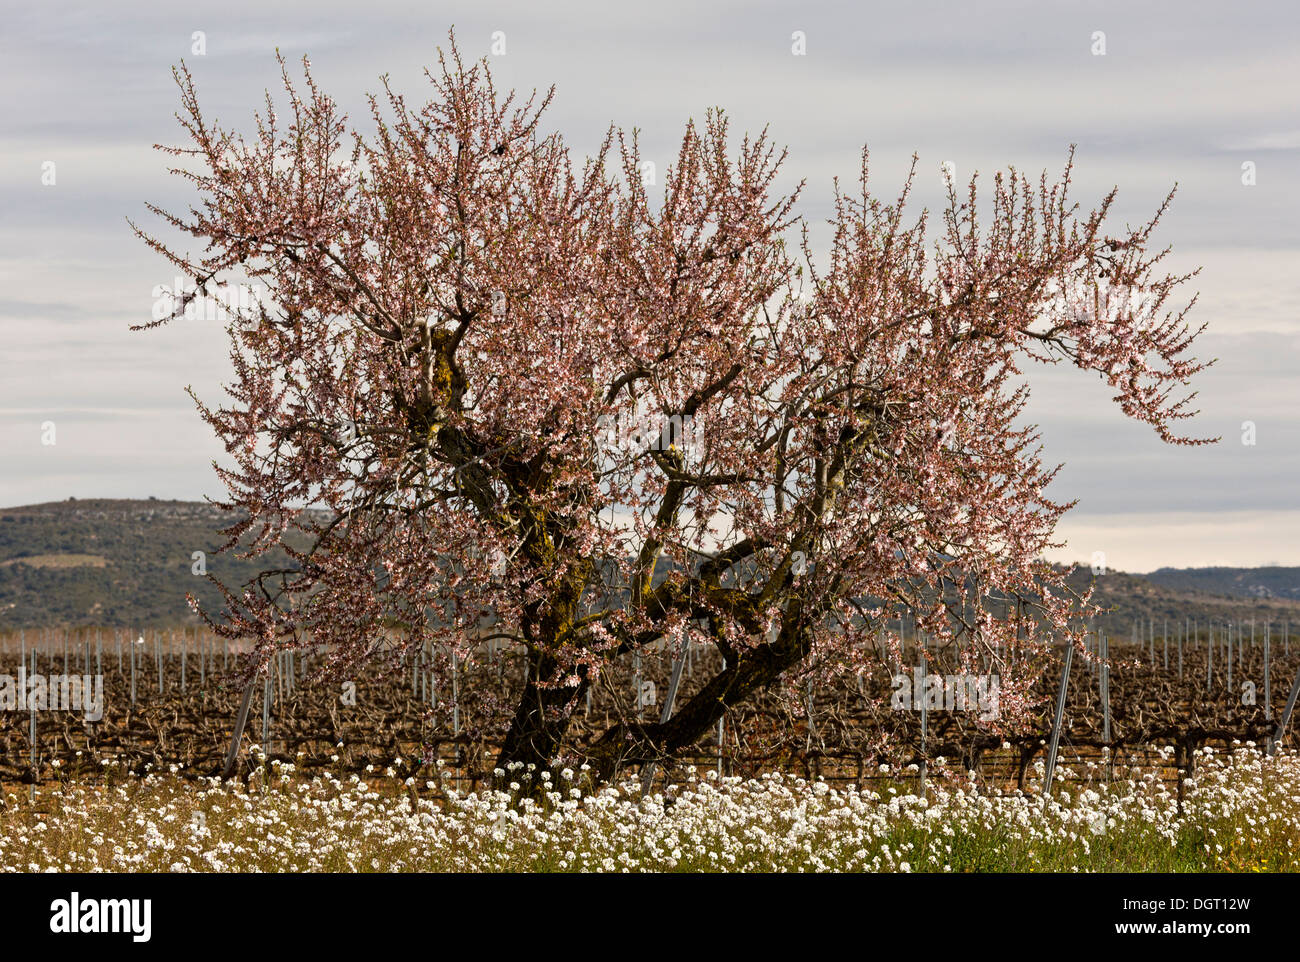 Almond, Prunus amygdalus, at blossom time in early spring. Spain. Stock Photo